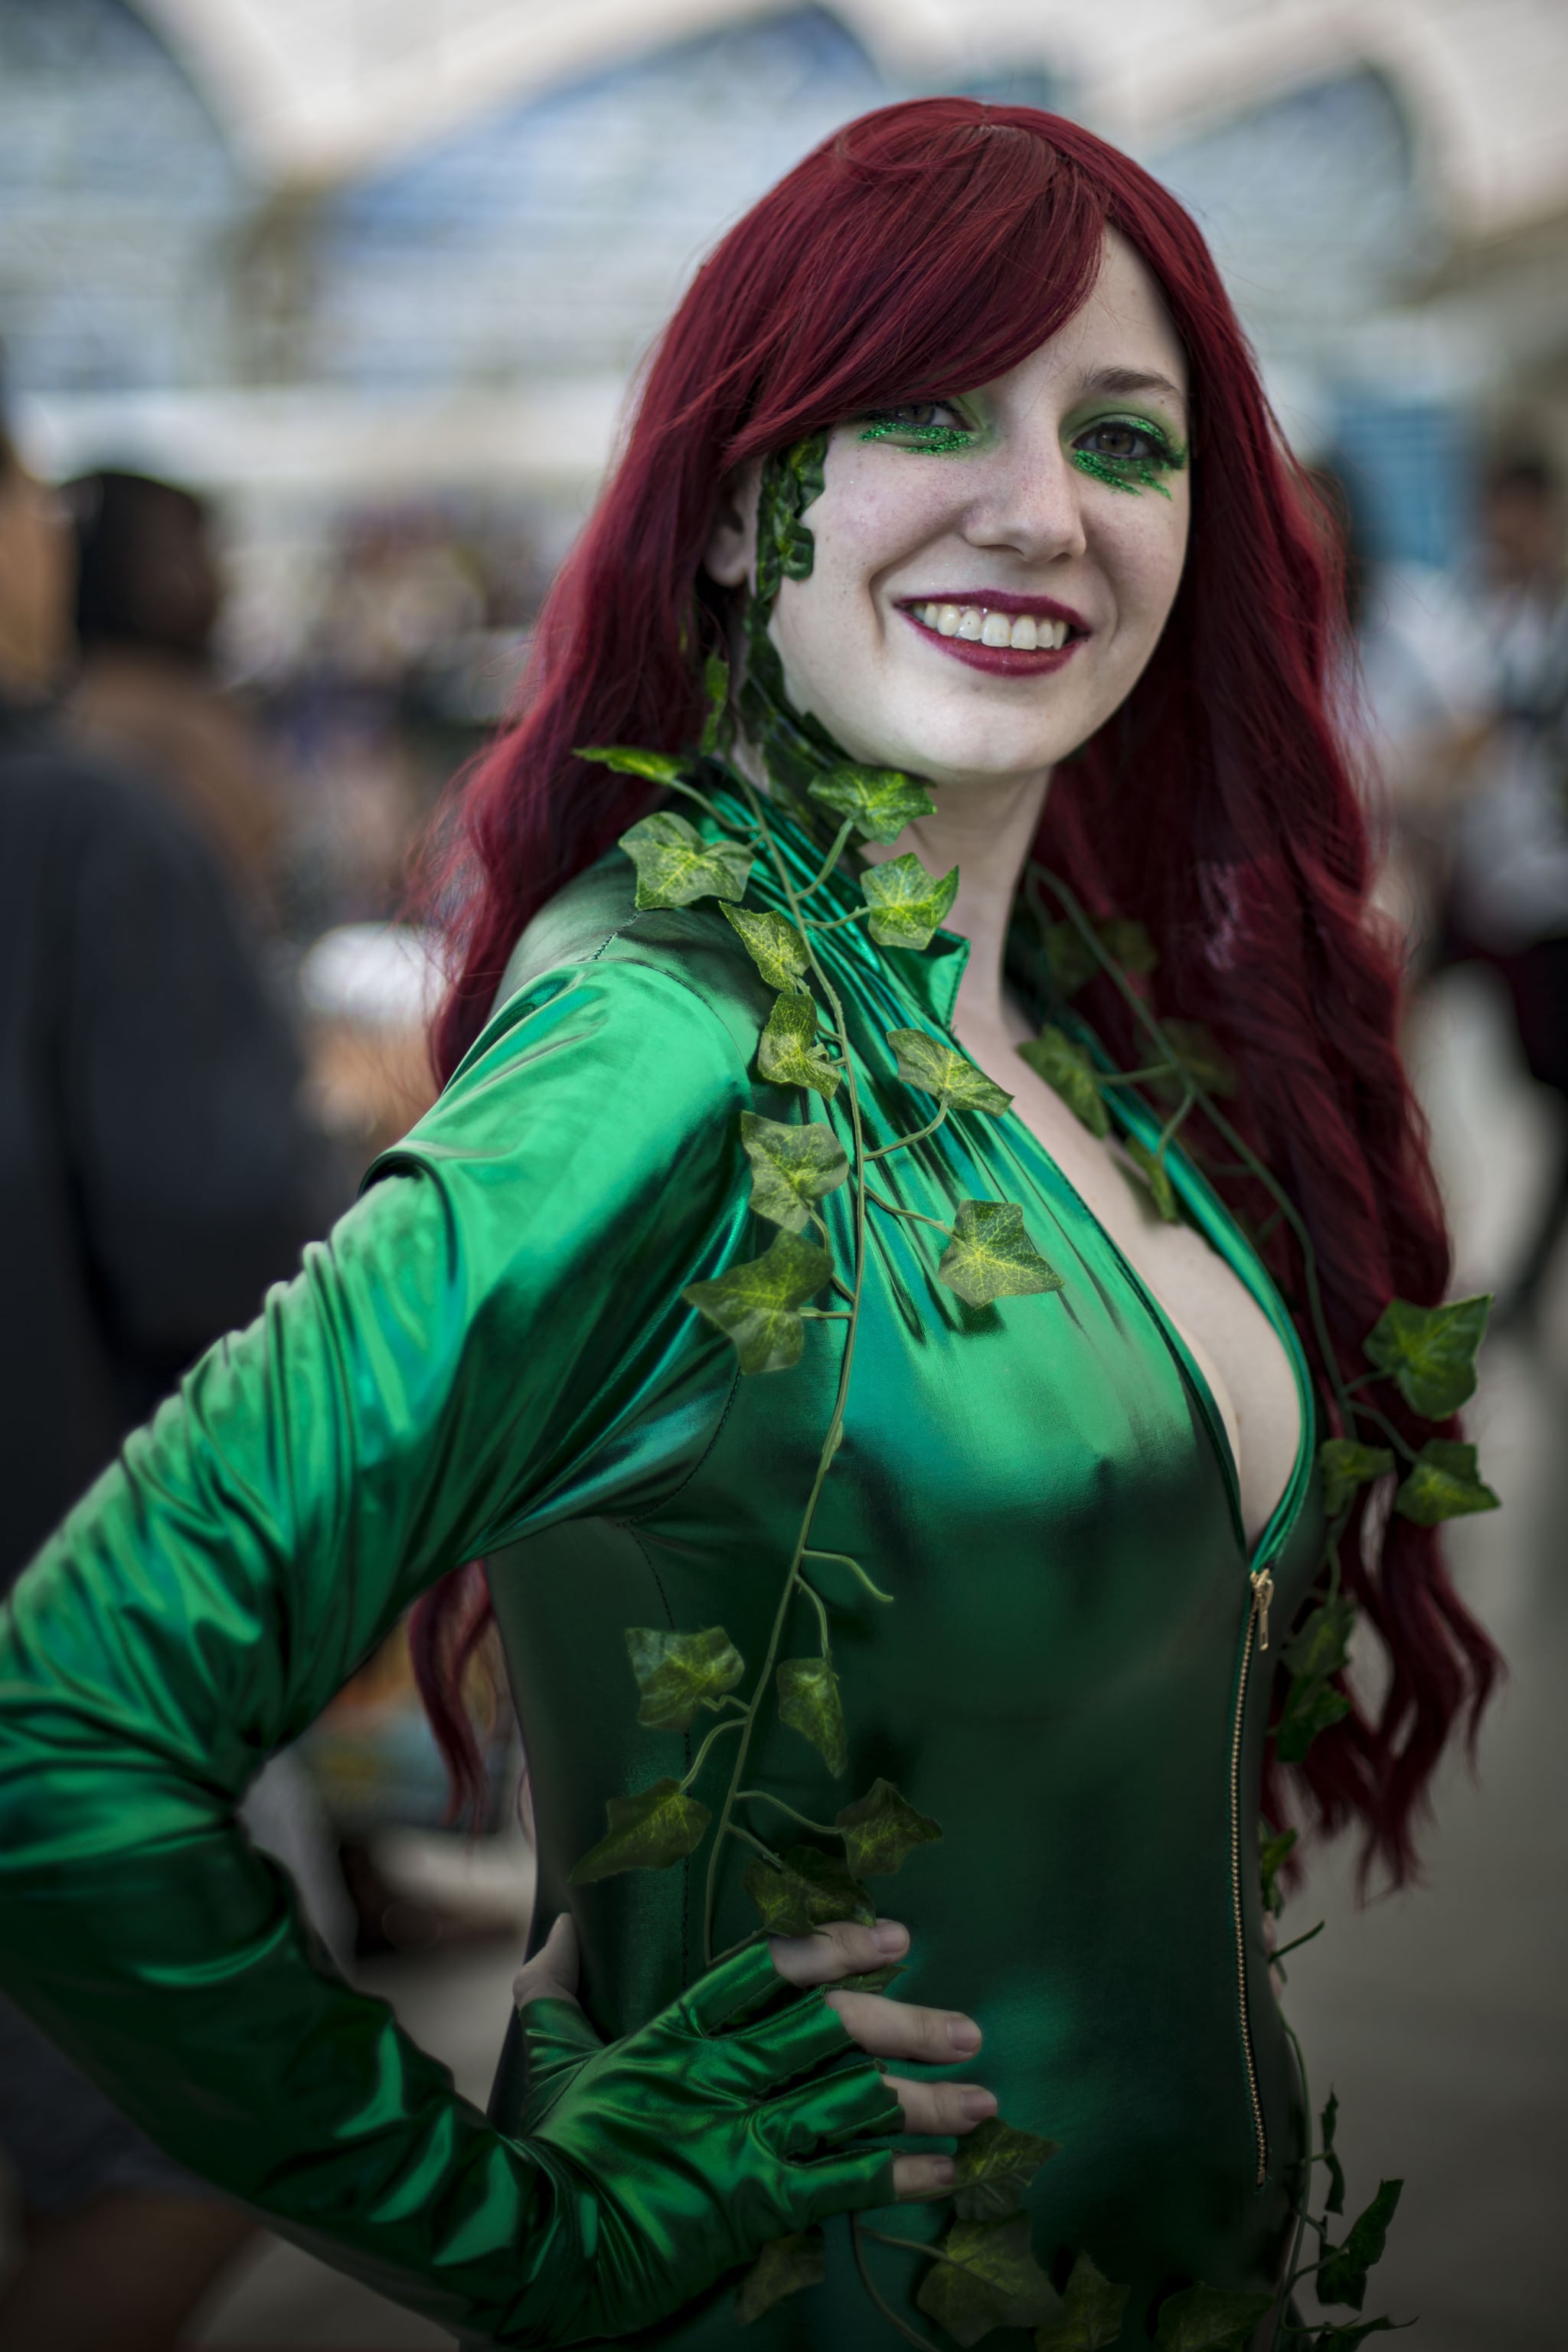 Poison Ivy From Batman 140 Photos Of The Most Creative Cosplays From San Diego Comic Con 19 Popsugar Entertainment Photo 50